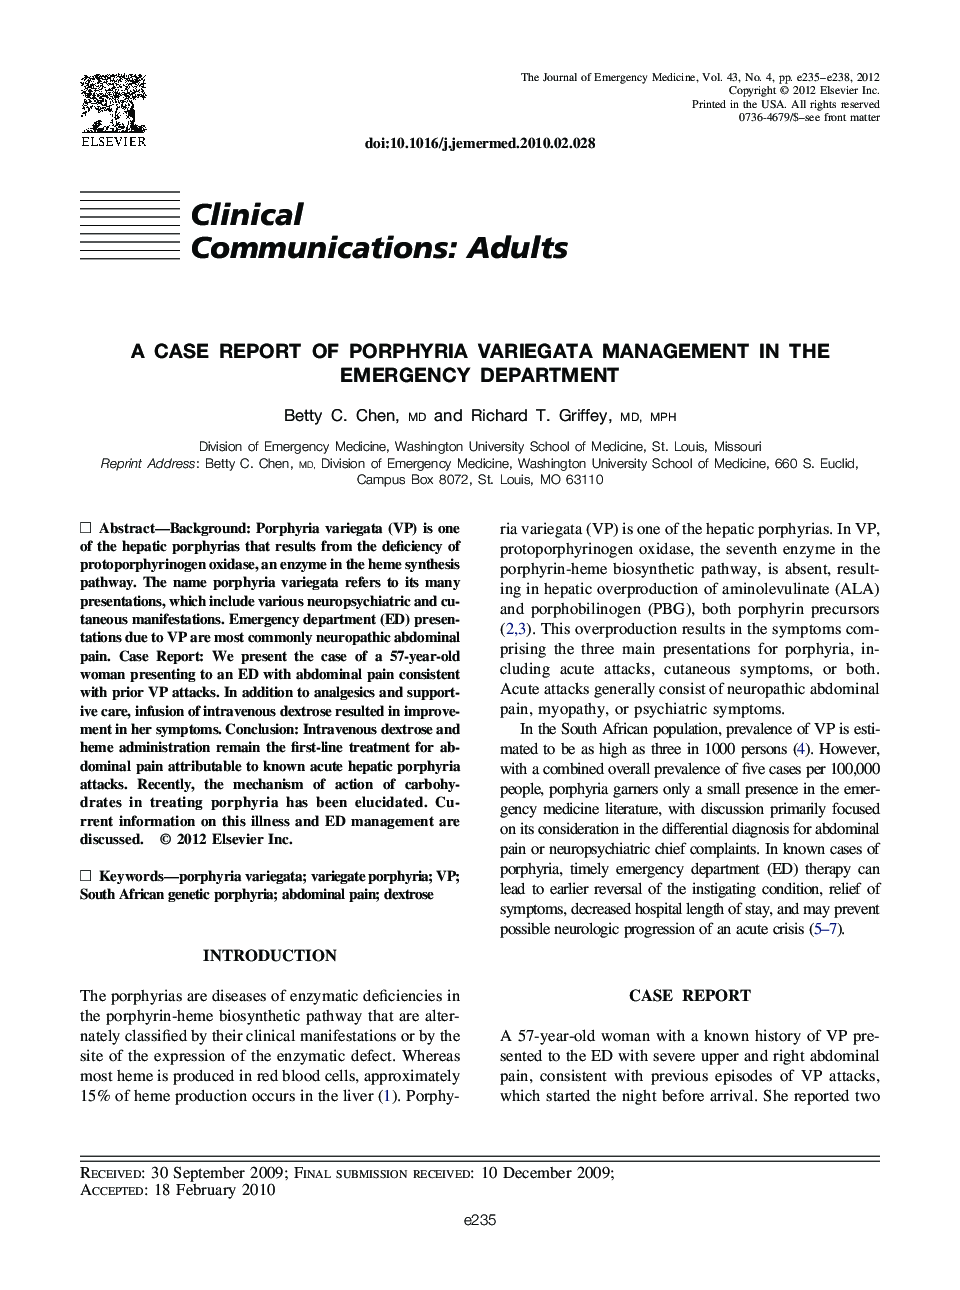 A Case Report of Porphyria Variegata Management in the Emergency Department